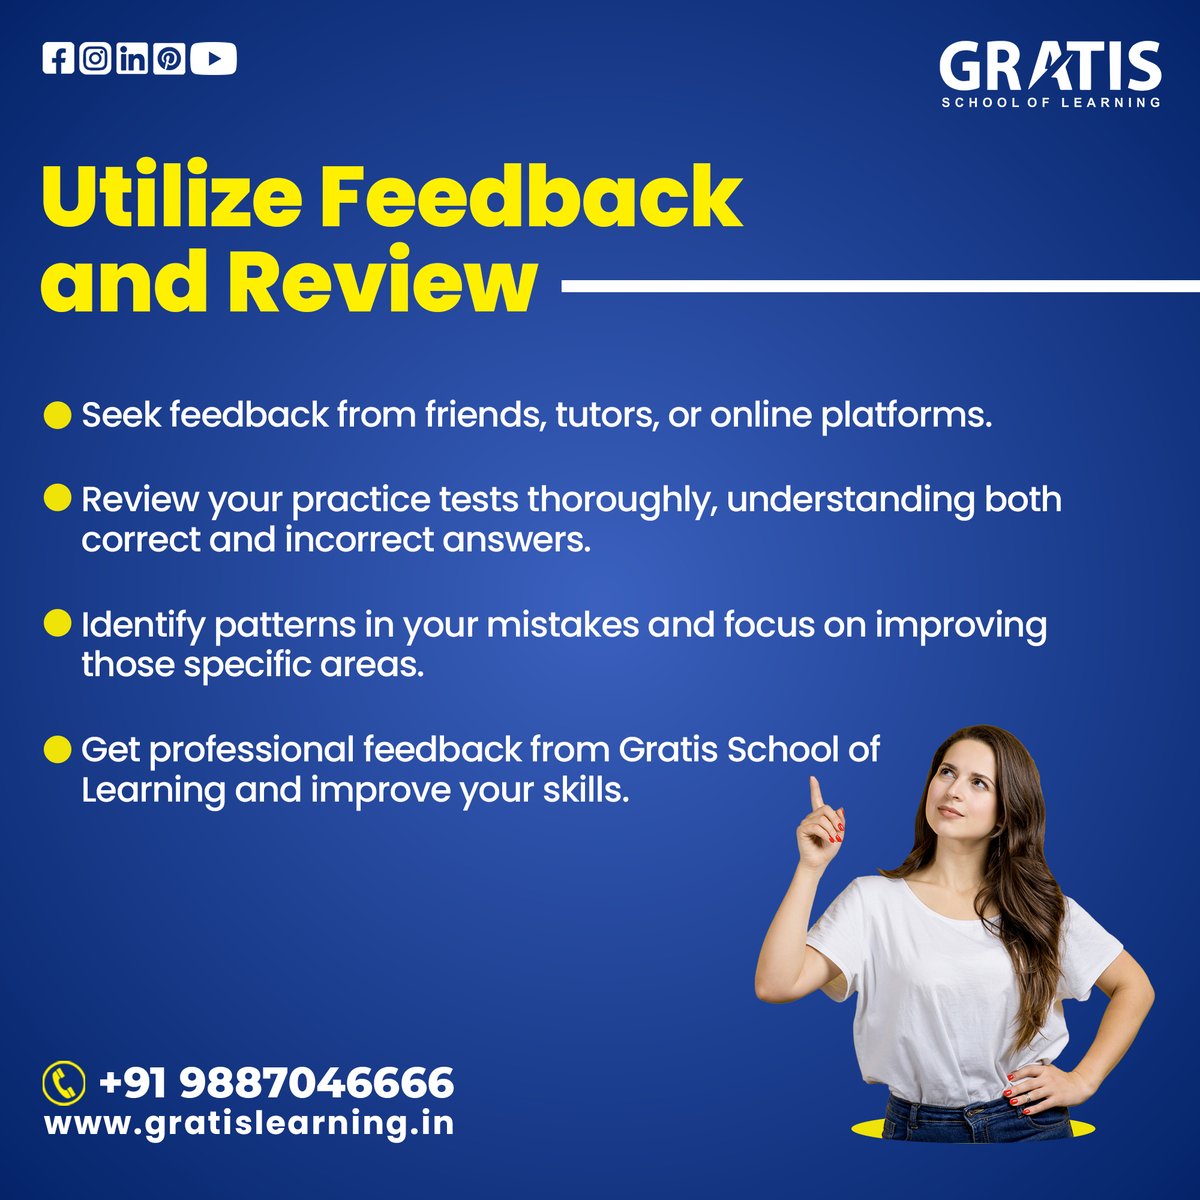 Here are more tips in our #PTEpreptips series. Use these strategies into your #study routine and enhance your performance
𝗩𝗶𝘀𝗶𝘁: gratislearning.in
𝗖𝗮𝗹𝗹 𝘂𝘀:+91 9887046666
#GratisLearning #GratisSchoolOfLearning #Panchkula #PTECoaching #PTEPreparationTips #PTEtips